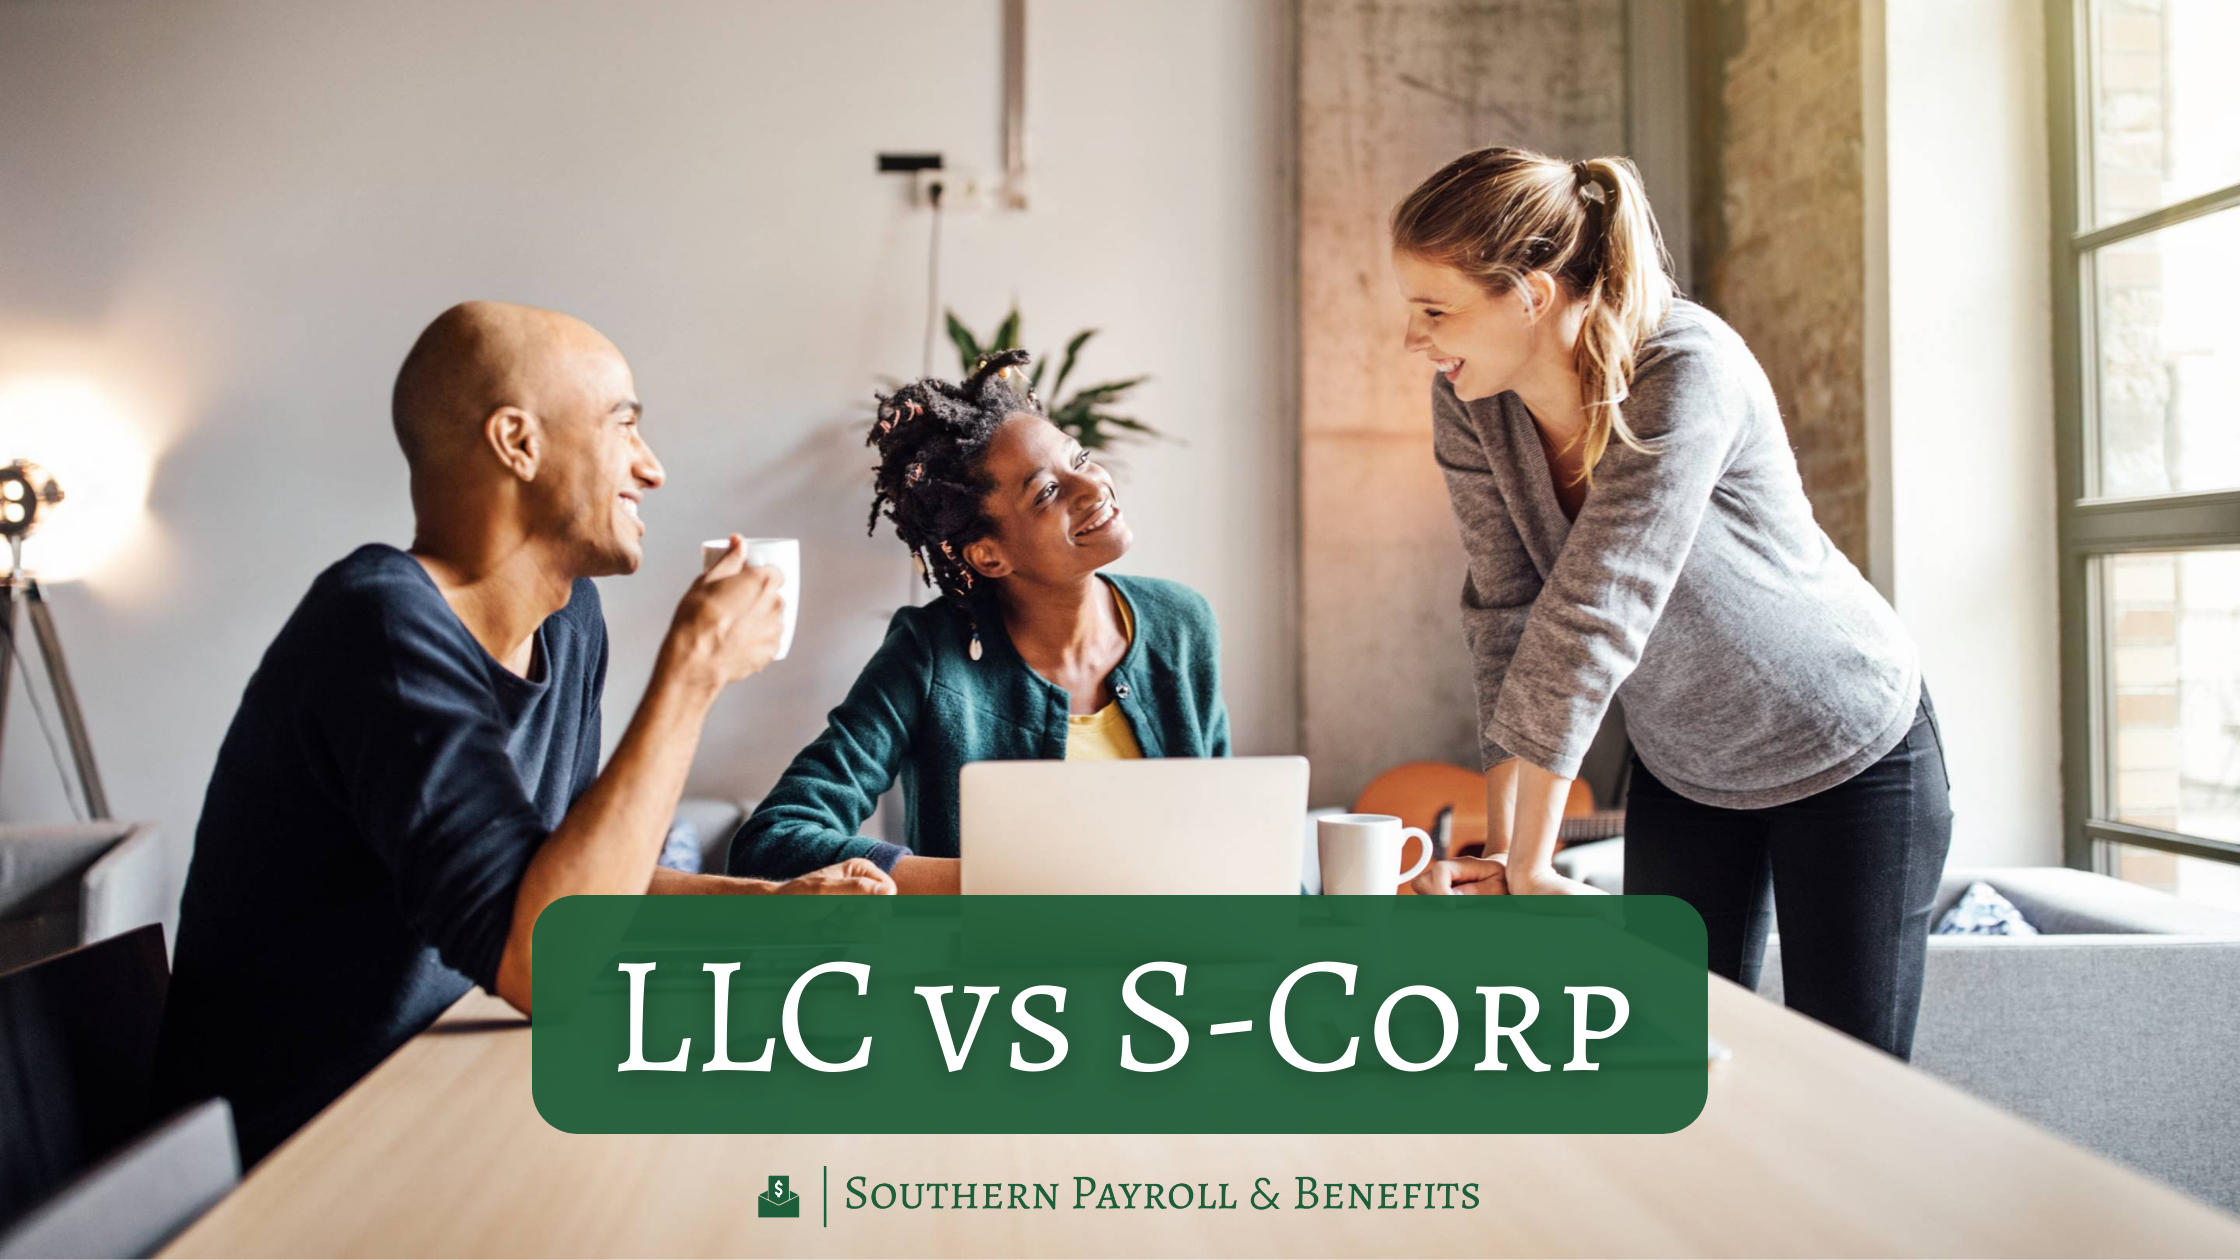 Should I Set Up My Business as an LLC or S-Corp?